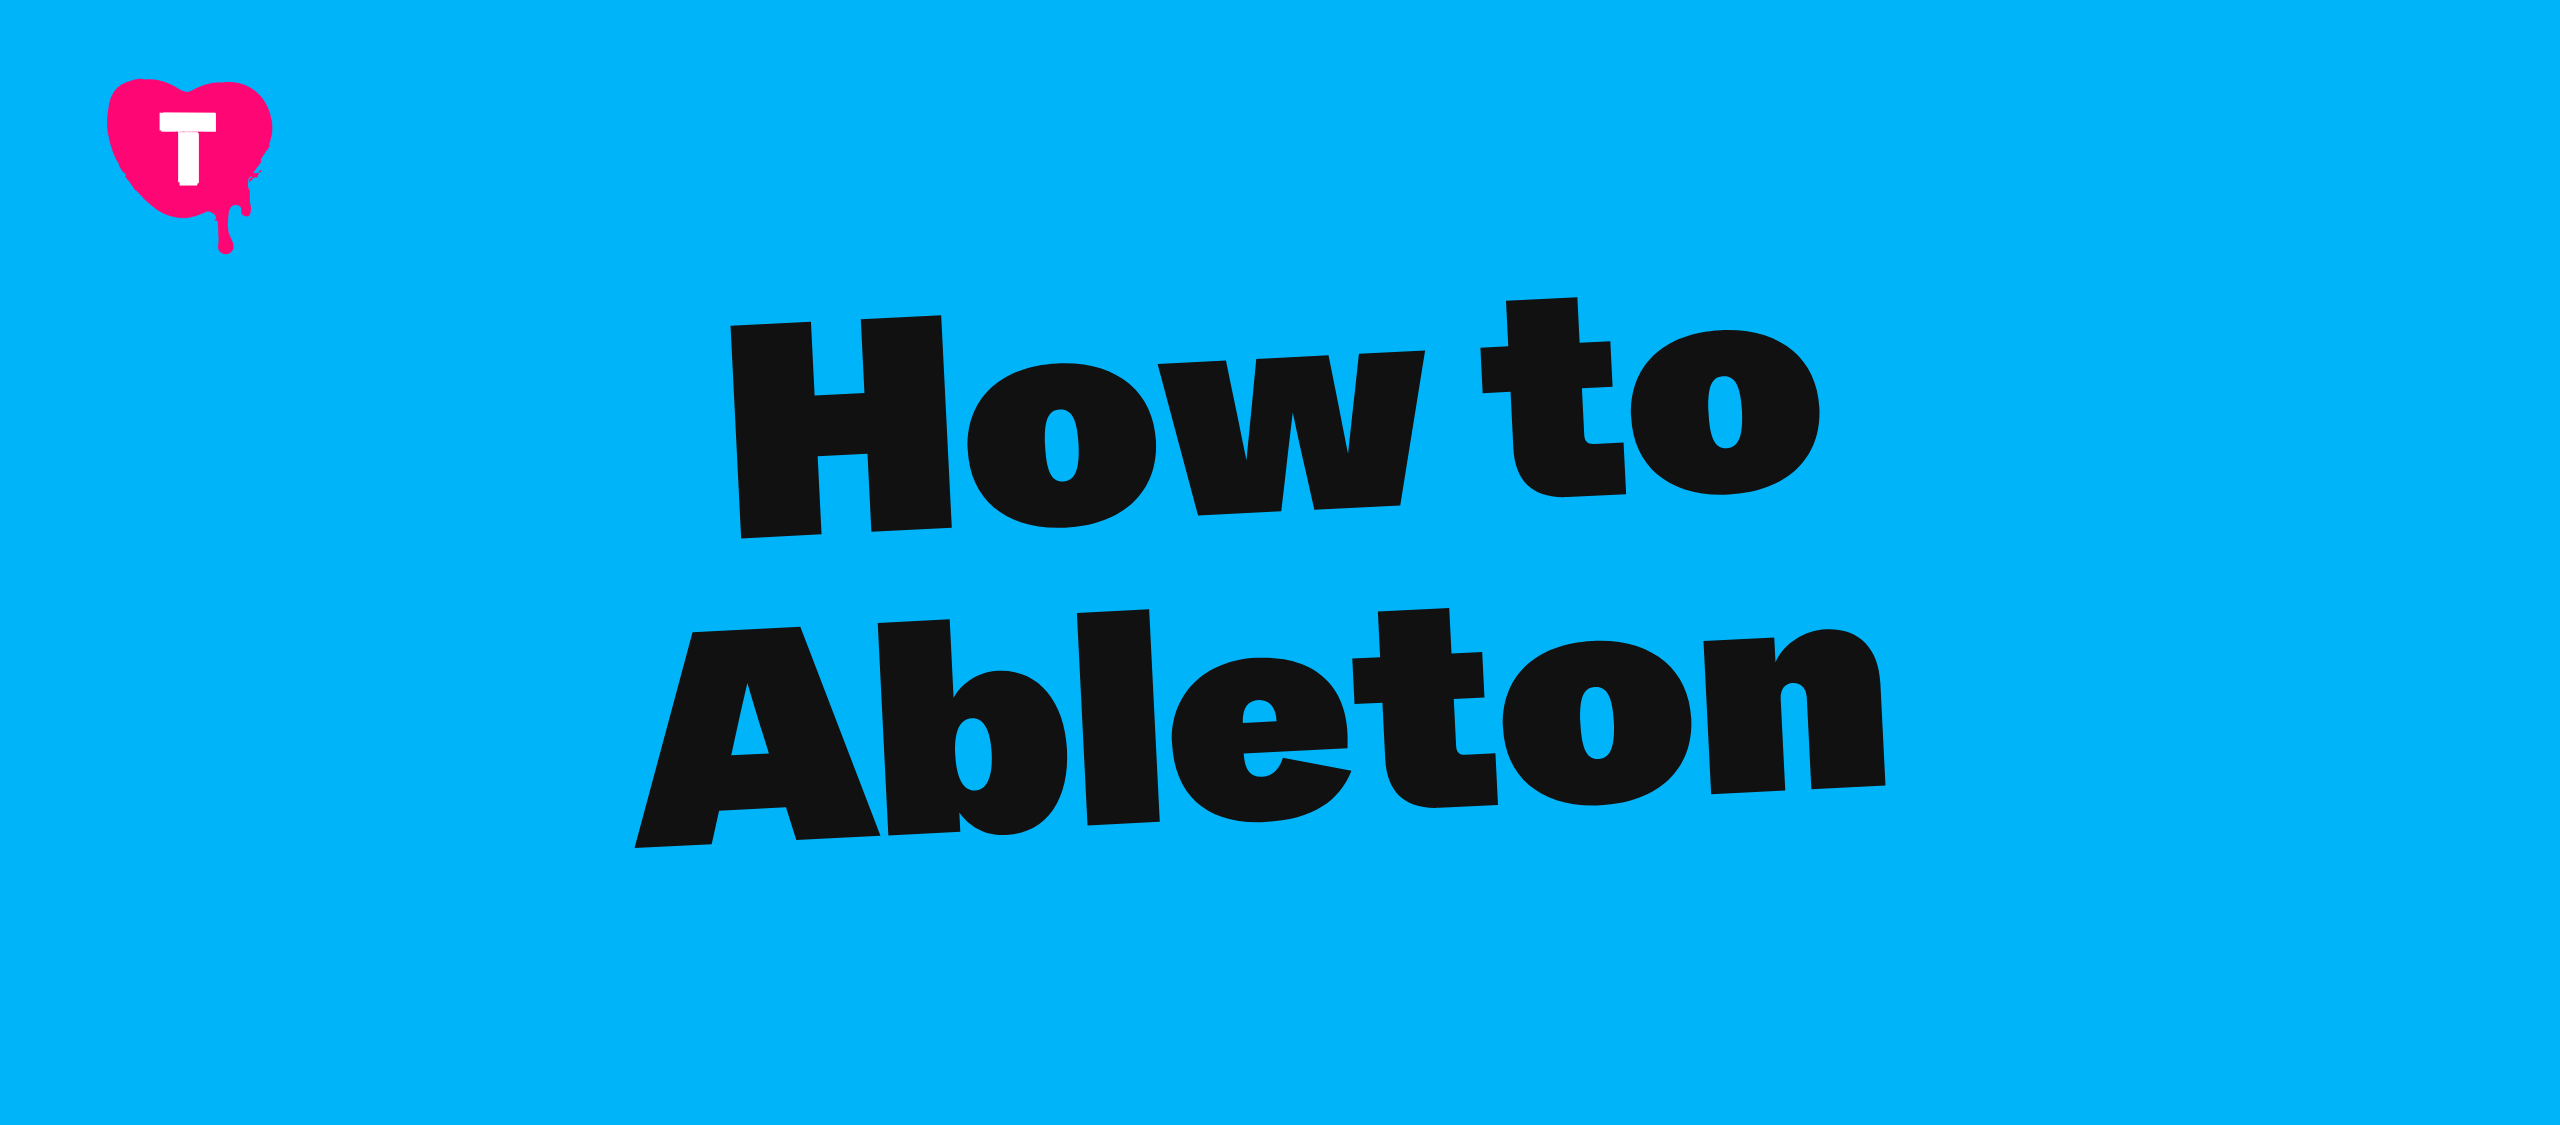 How to Ableton